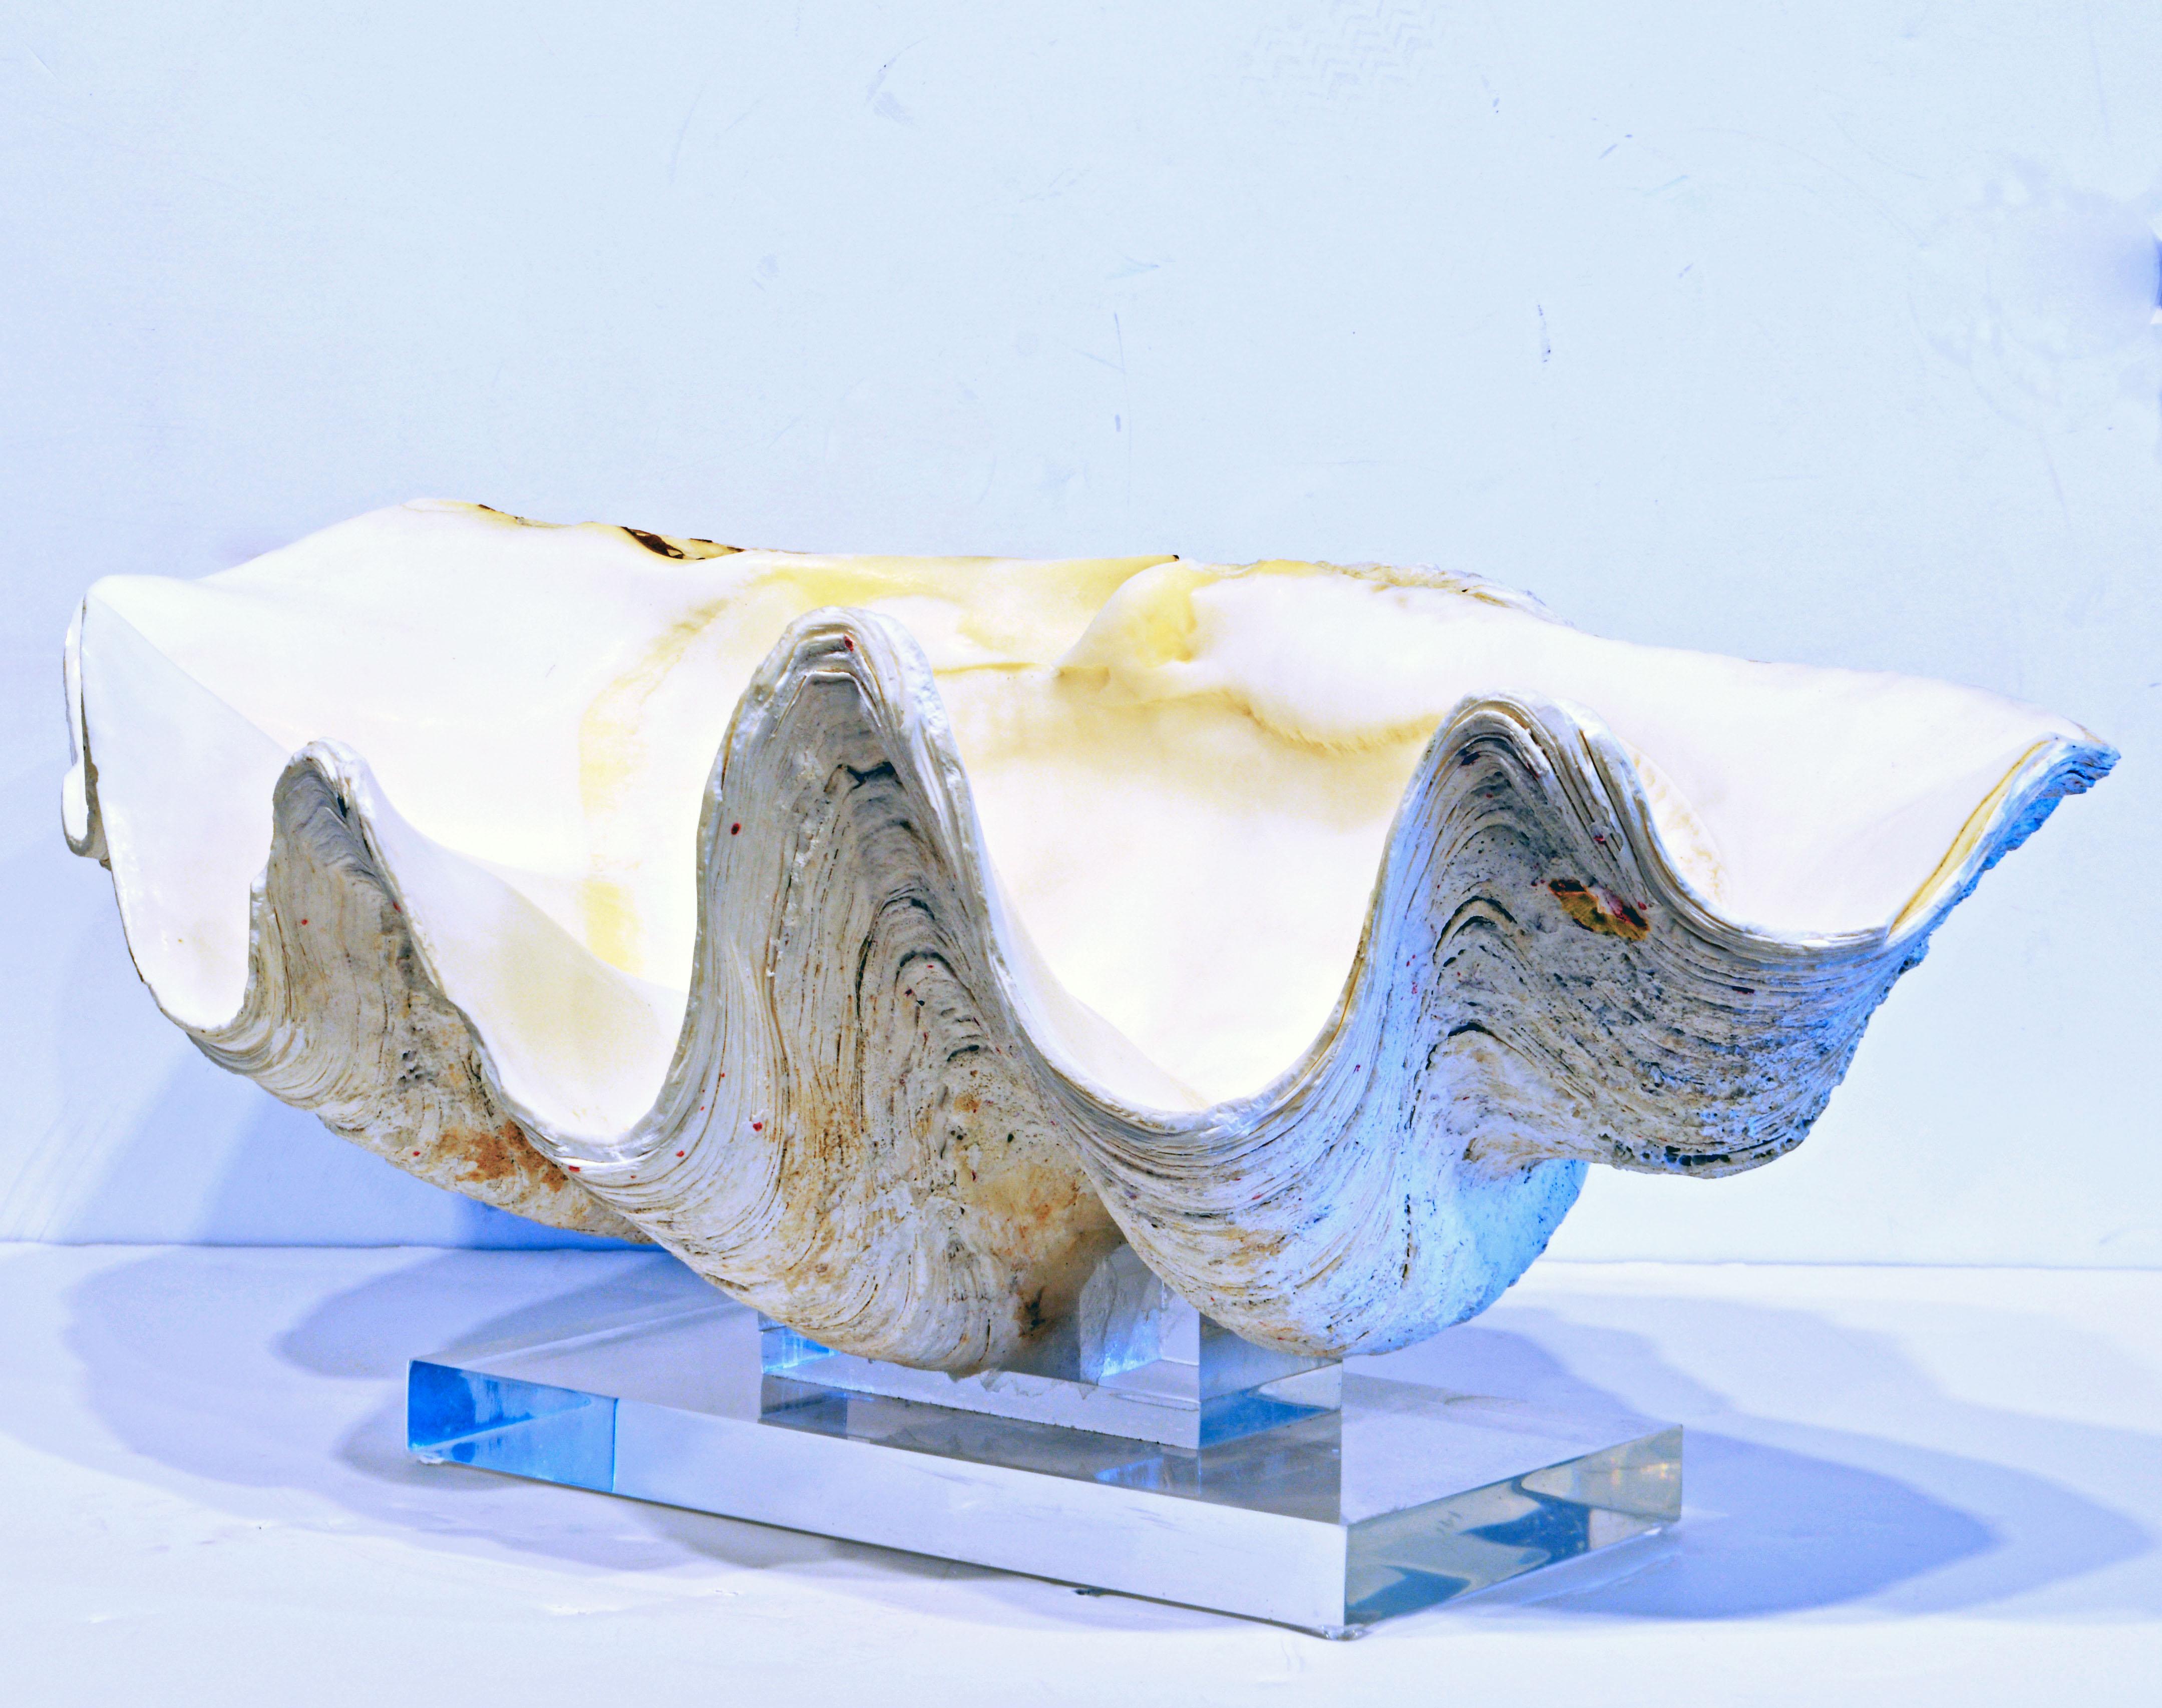 24 inches long this clam shell has great sculptural qualities. The Lucite base makes it easy to place and raises the shell for an enhanced visual impression.